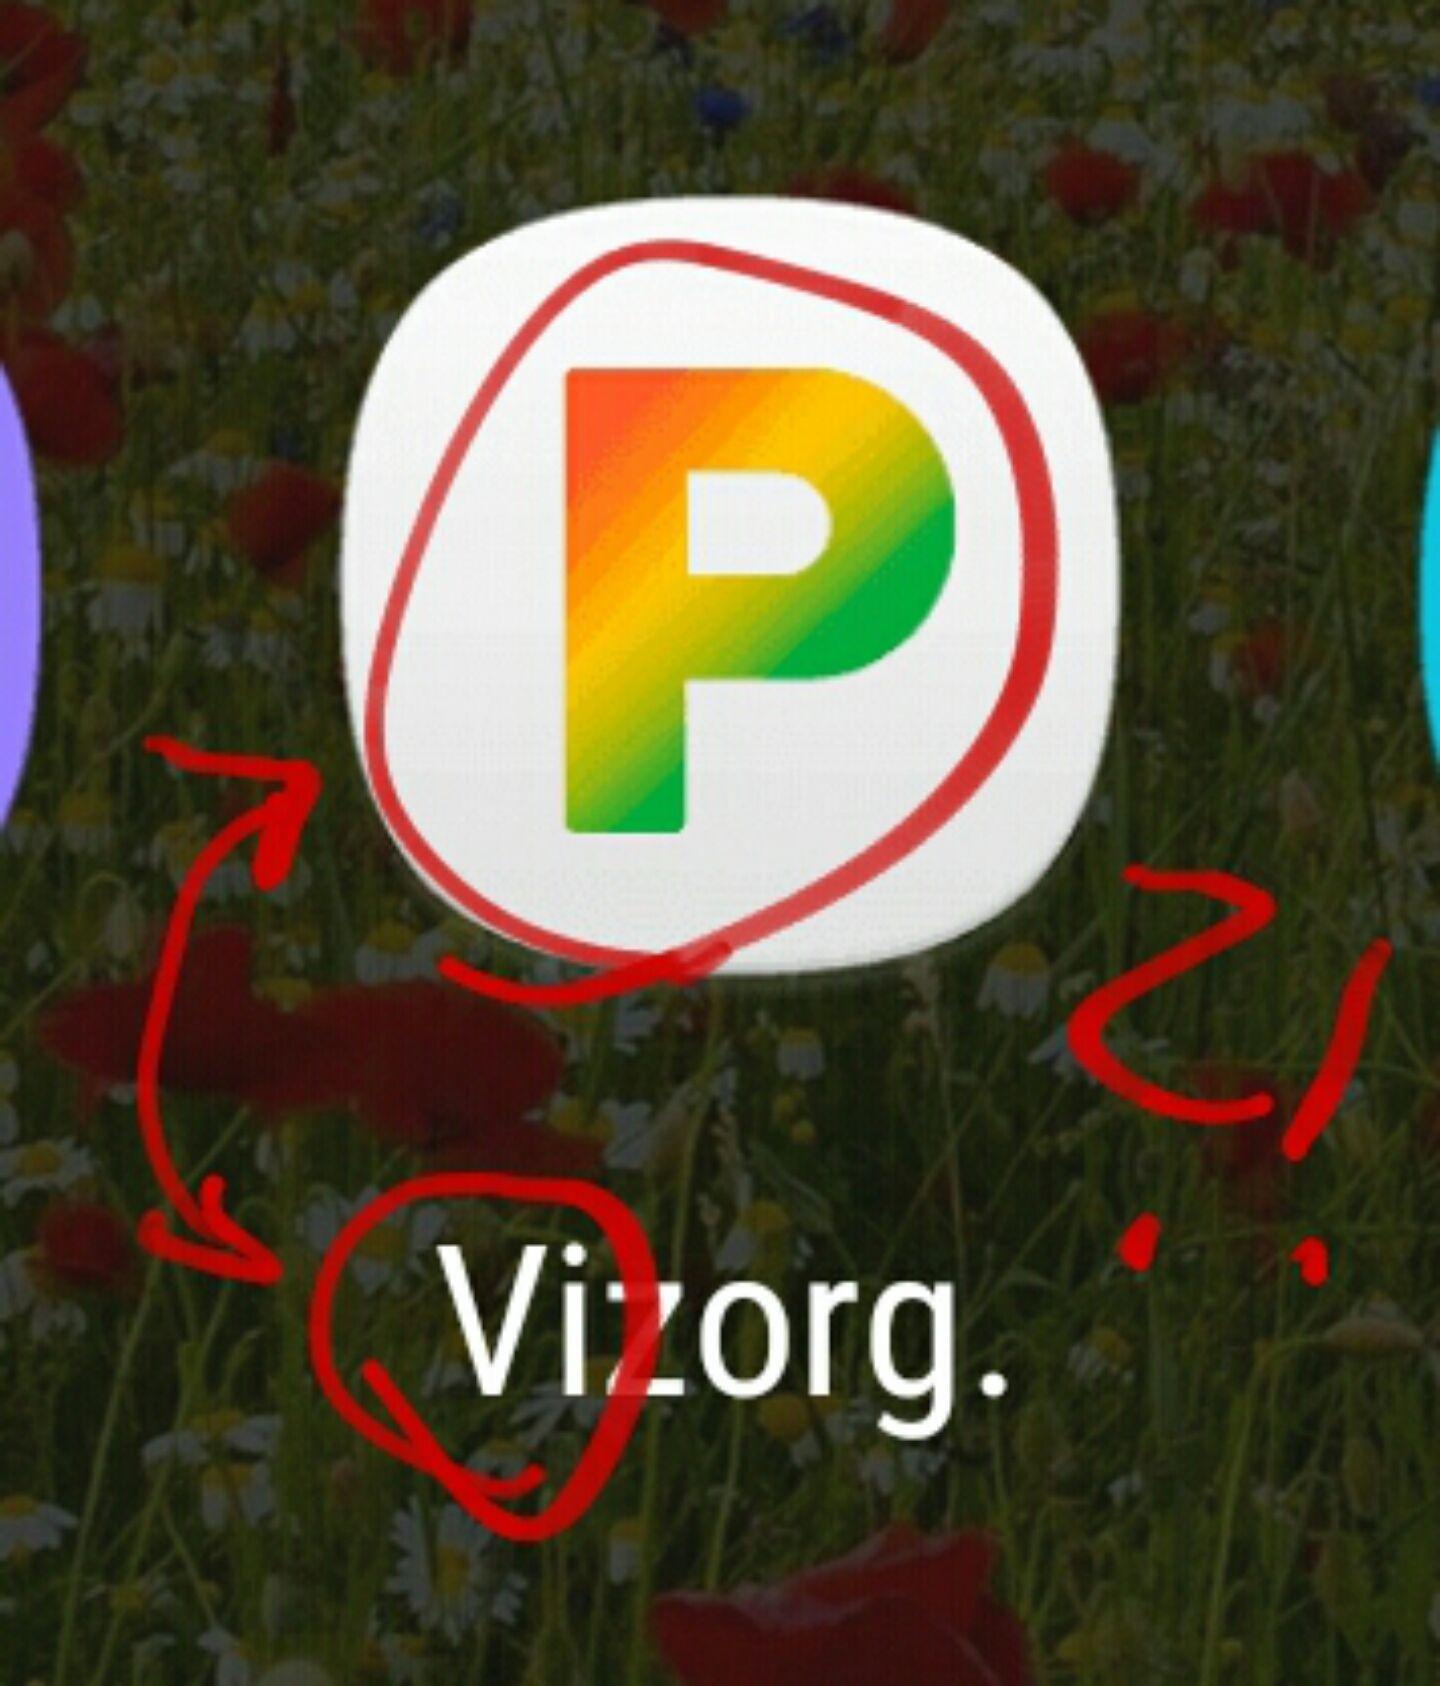 Title App Logo - App logo is P and there is no P in the title